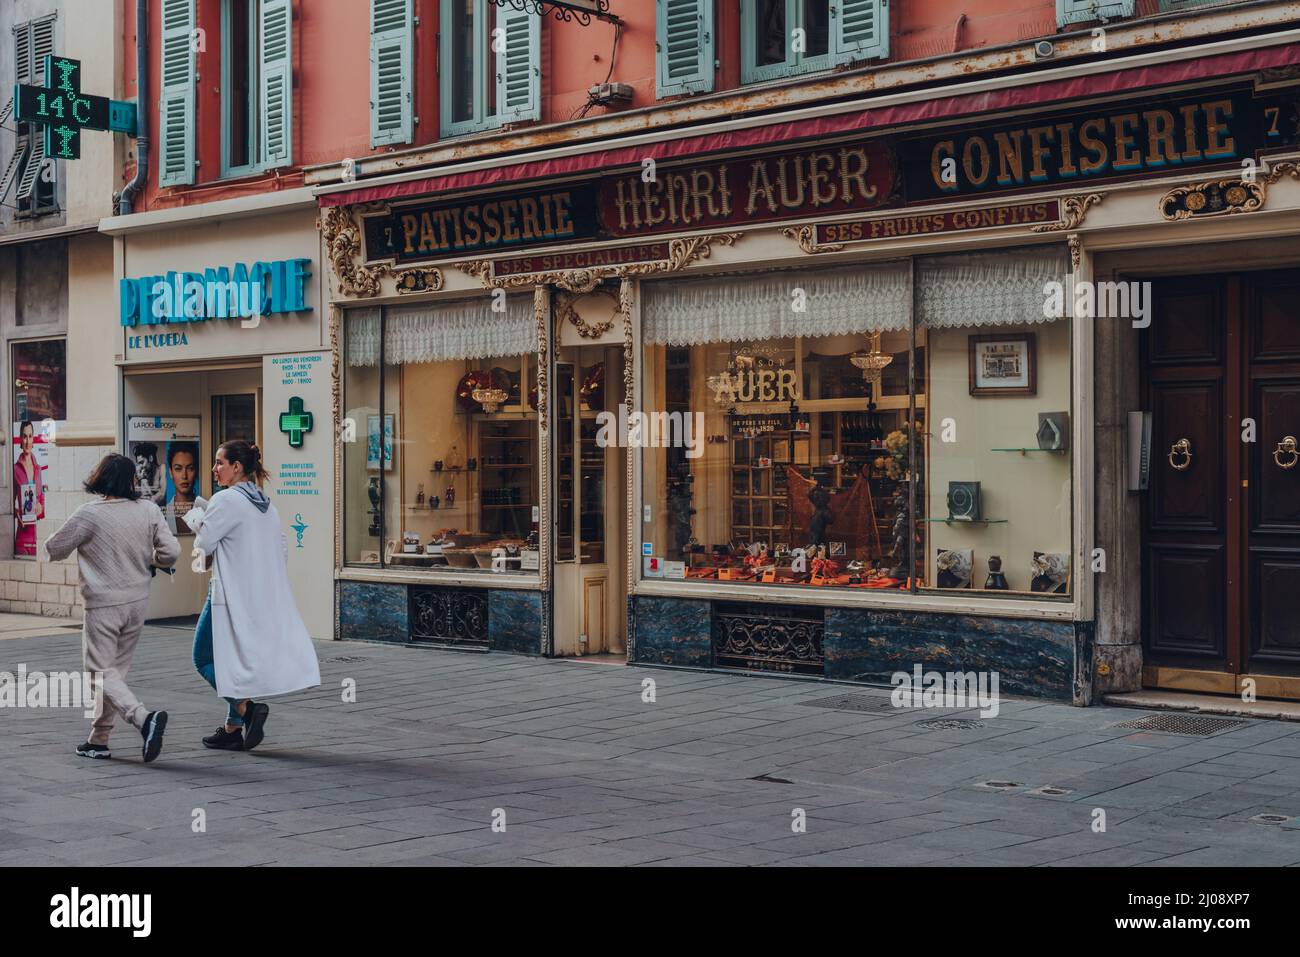 Nice, France - March 10, 2022: Exterior of La Maison Auer, a family owned Chocolaterie and Confiserie in Nice dating back to 1820, women walking past. Stock Photo